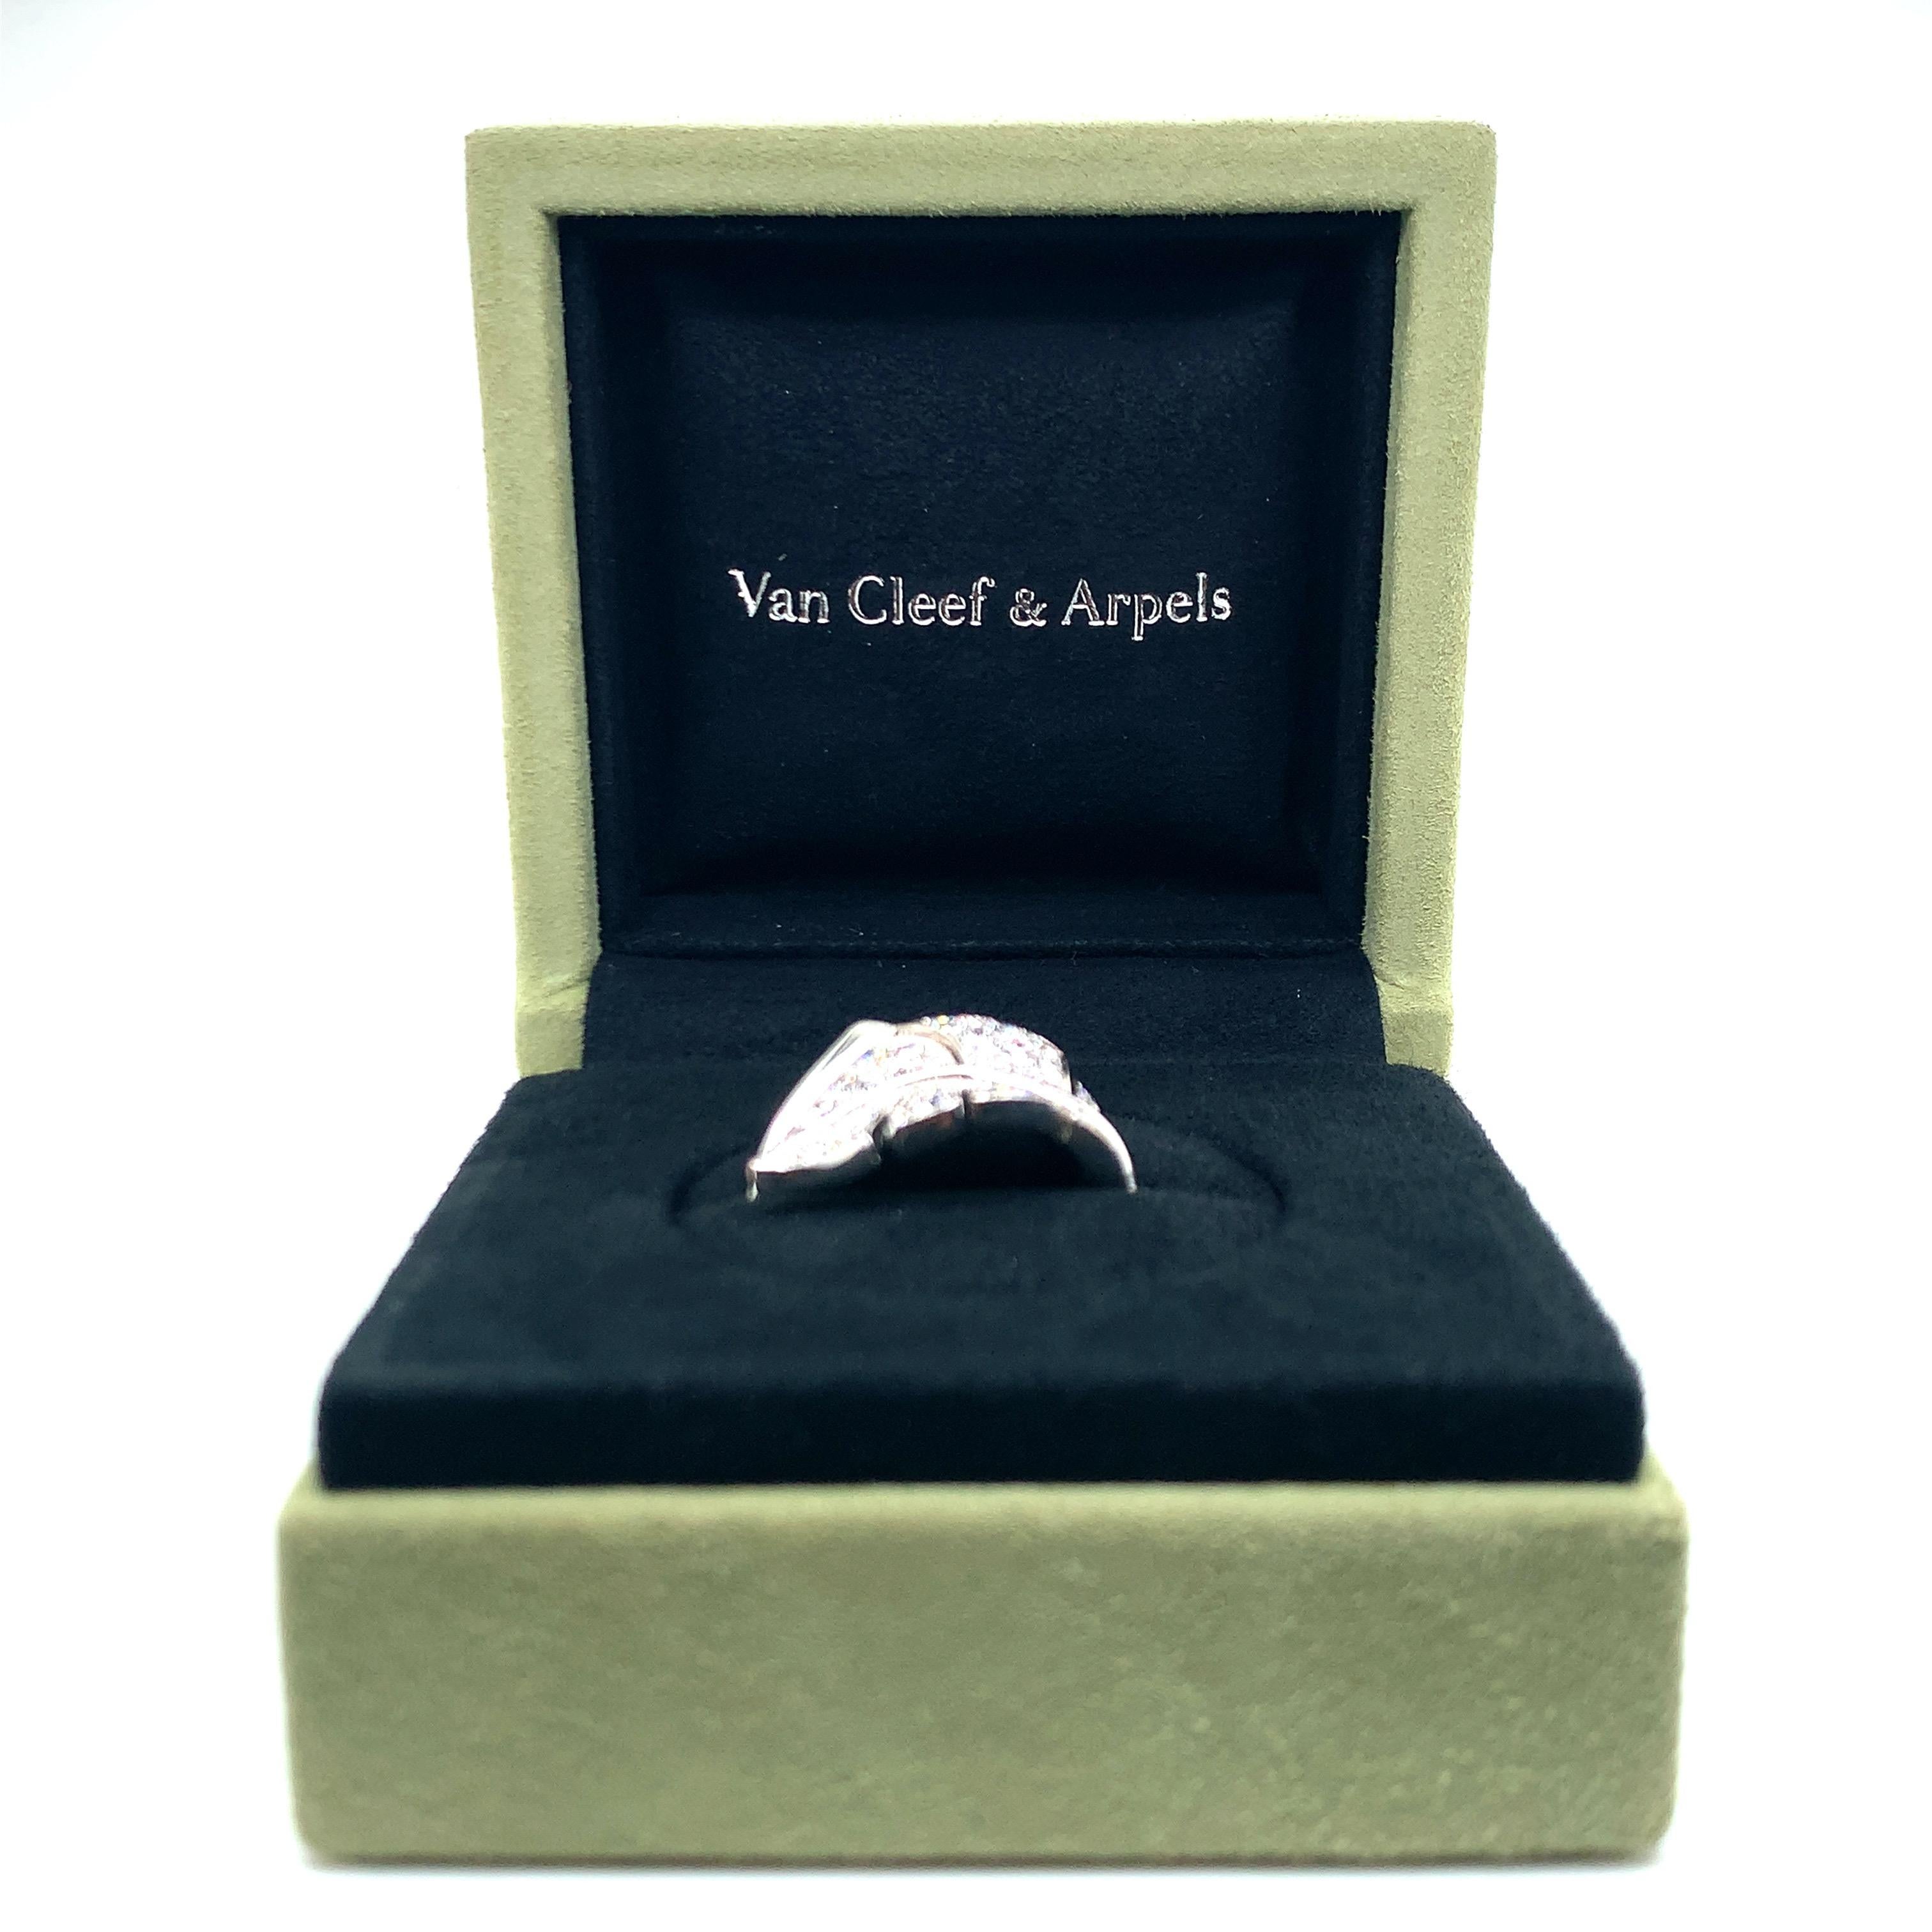 Van Cleef & Arpels White Gold Diamond Leaf Ring In Excellent Condition For Sale In New York, NY